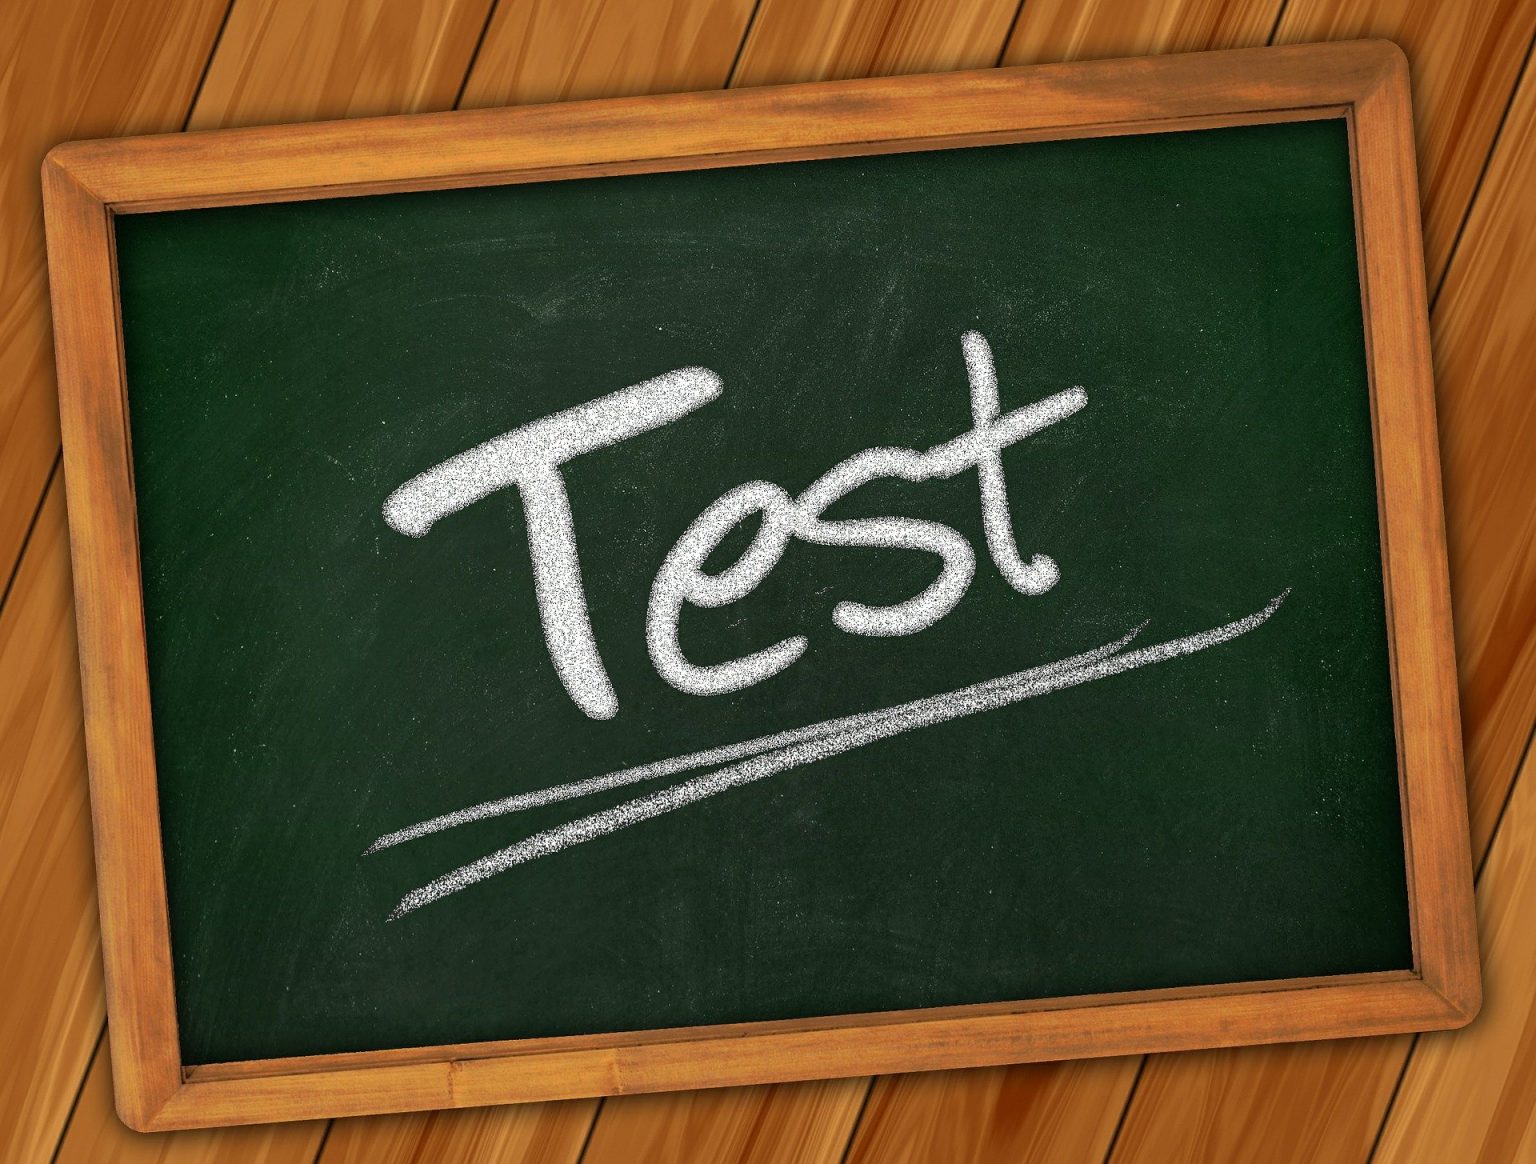 Overview Of Aptitude Tests At German Higher Education Institutions